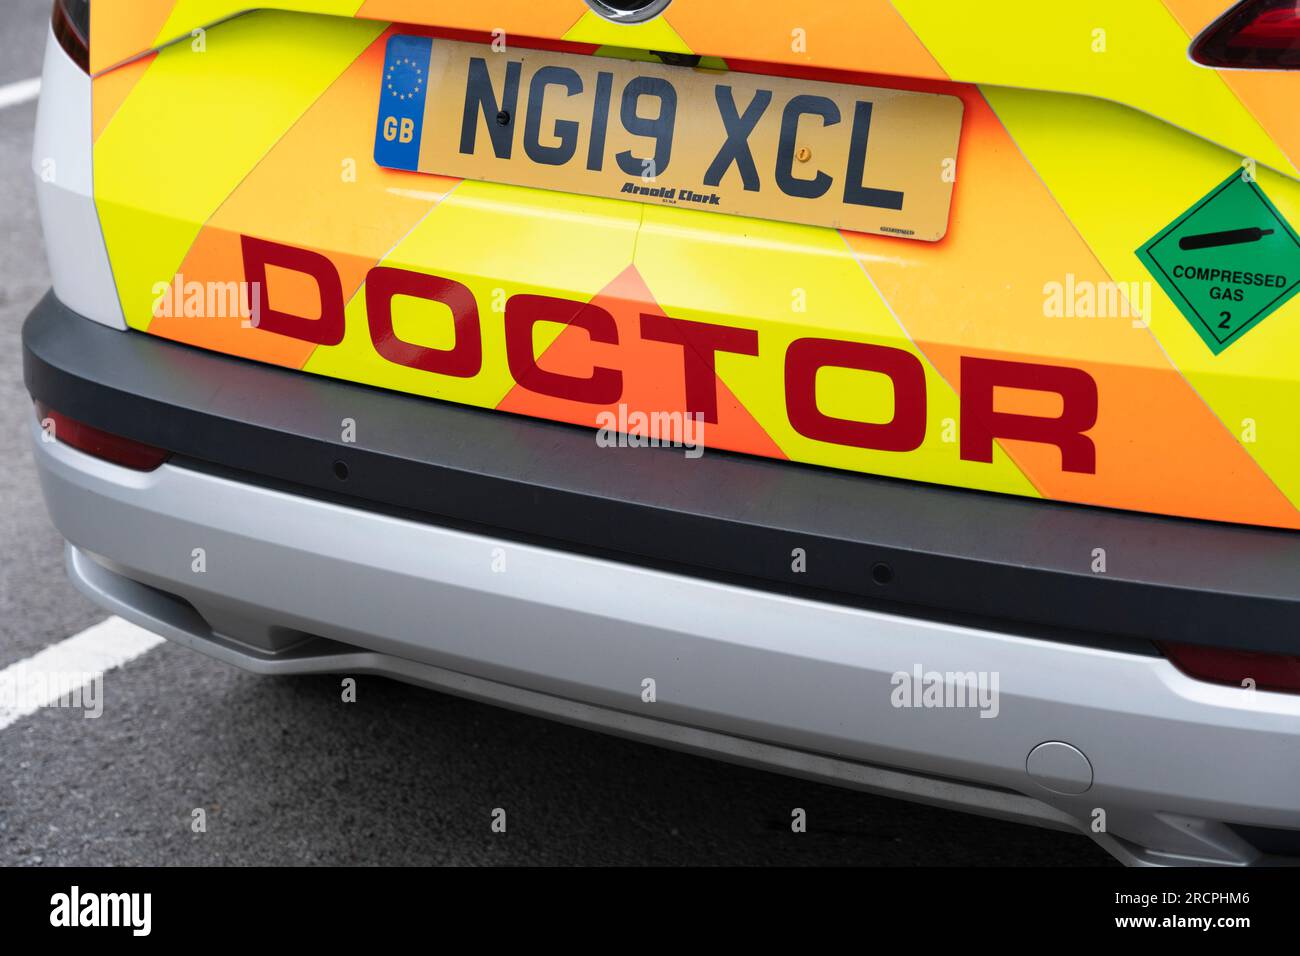 Doctor marking on the rear of a doctor's car for Hantsdoc which provides the Out of Hours service for NHUC (North Hampshire Urgent Care), UK Stock Photo